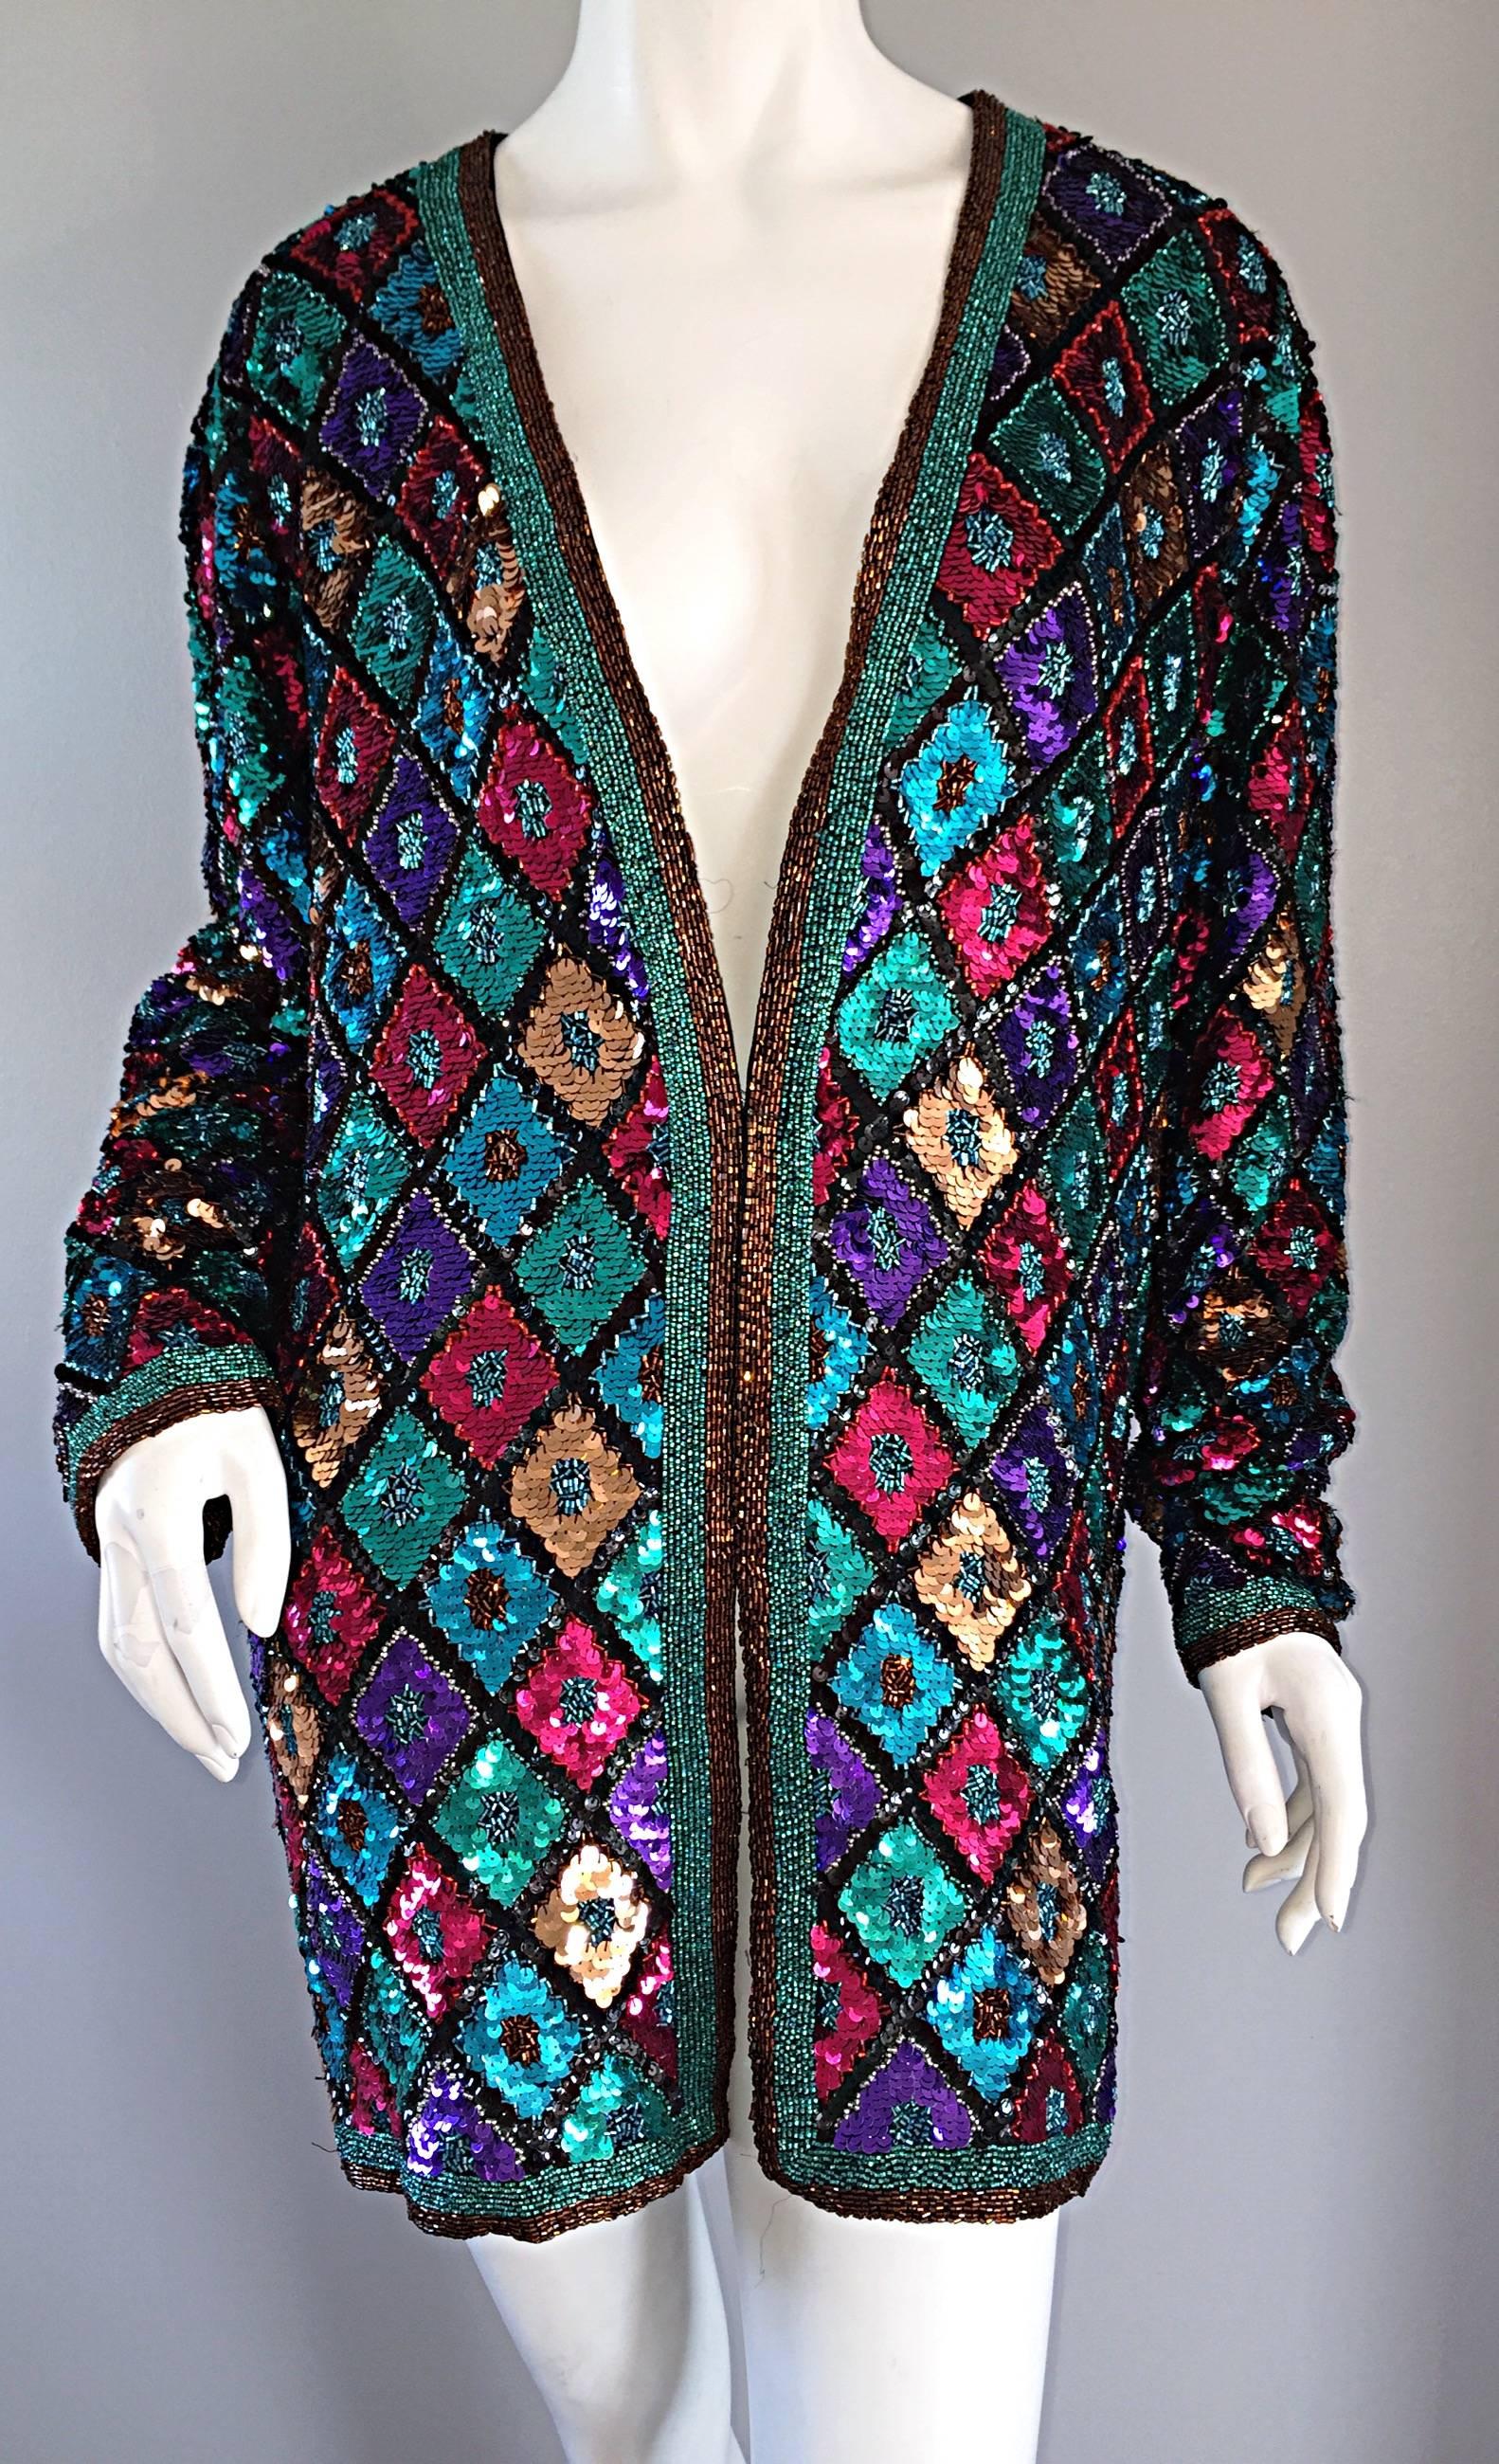 
Beautiful vintage Oleg Cassini fully sequined and beaded slouchy silk jacket / cardigan! The possibilities are endless with this beauty! Hot Pink, fuchsia, blue, teal, black, and gold sequins throughout, with teal and bronze seed beads trimming